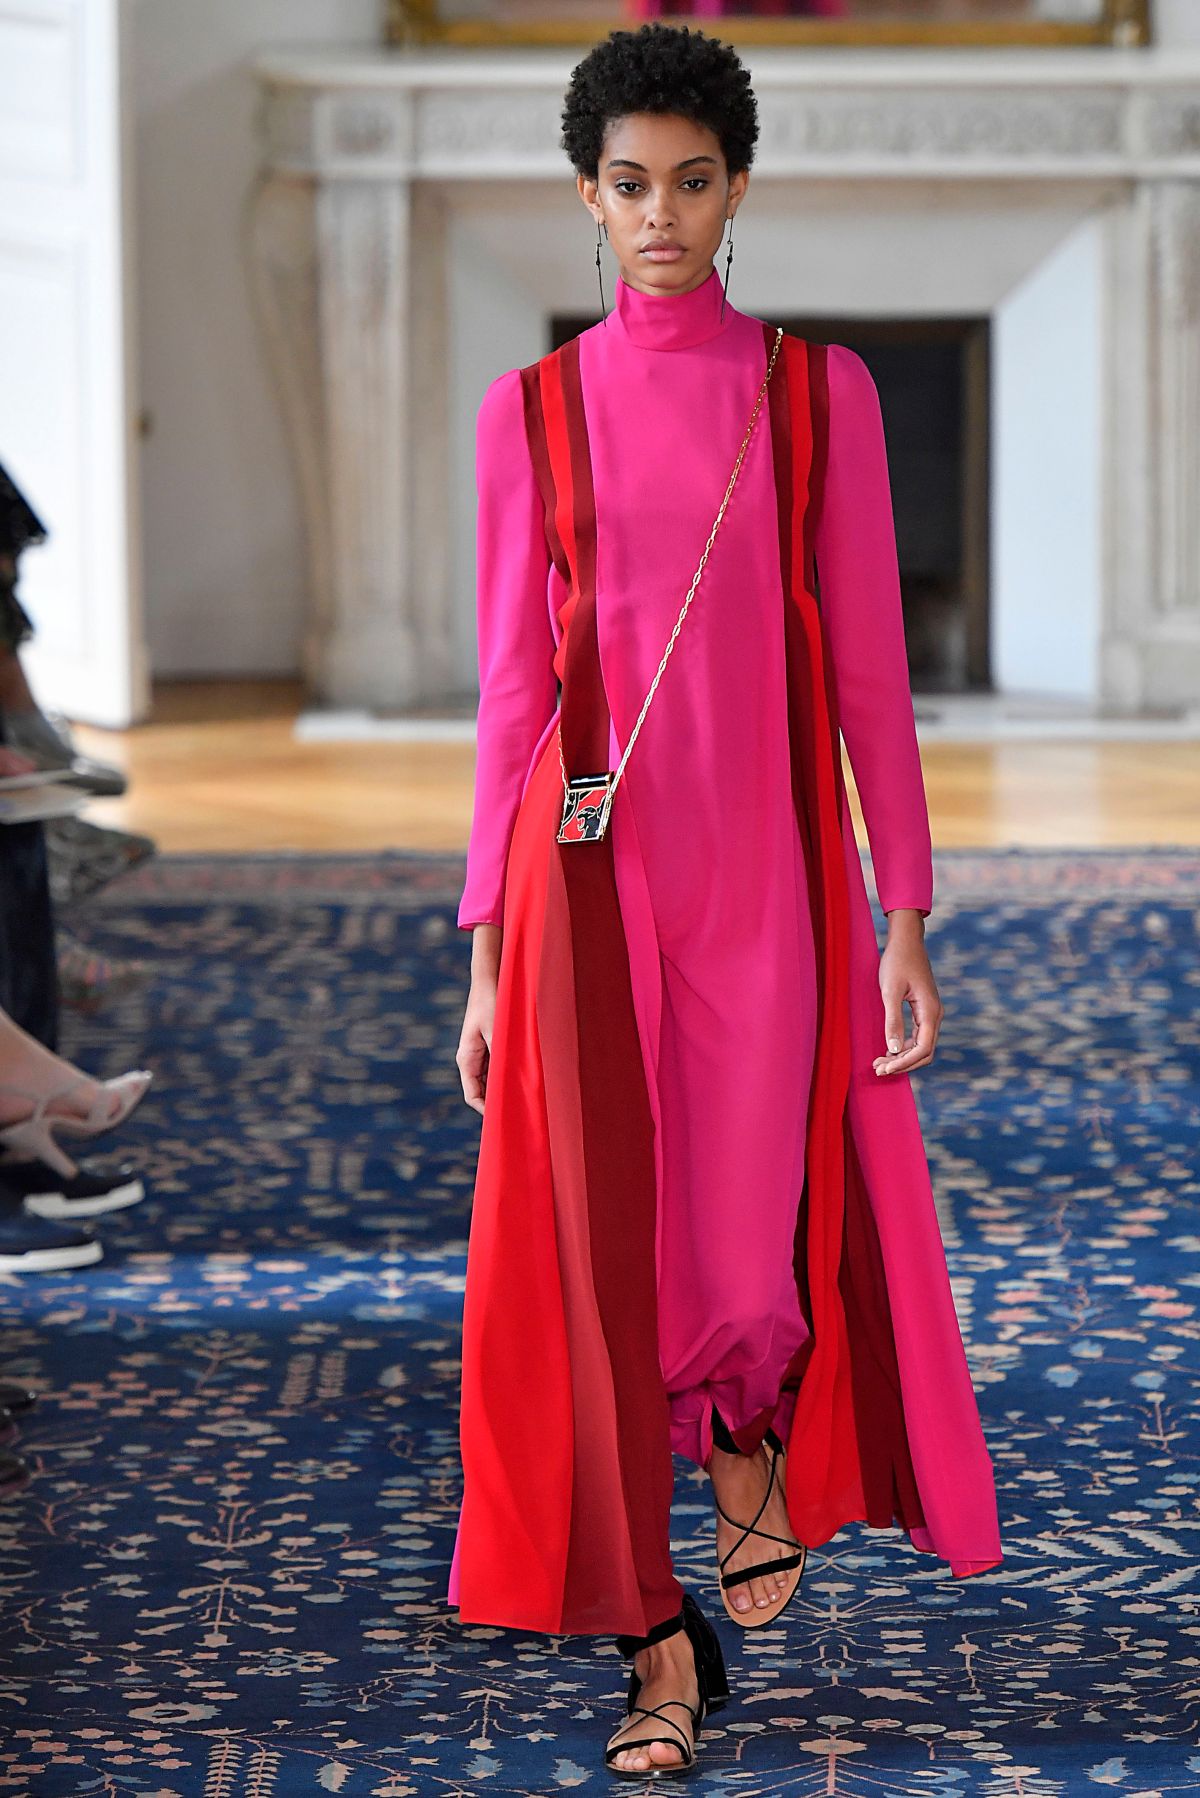 BEST IN SHOW: Top 30 Looks From Paris Fashion Week